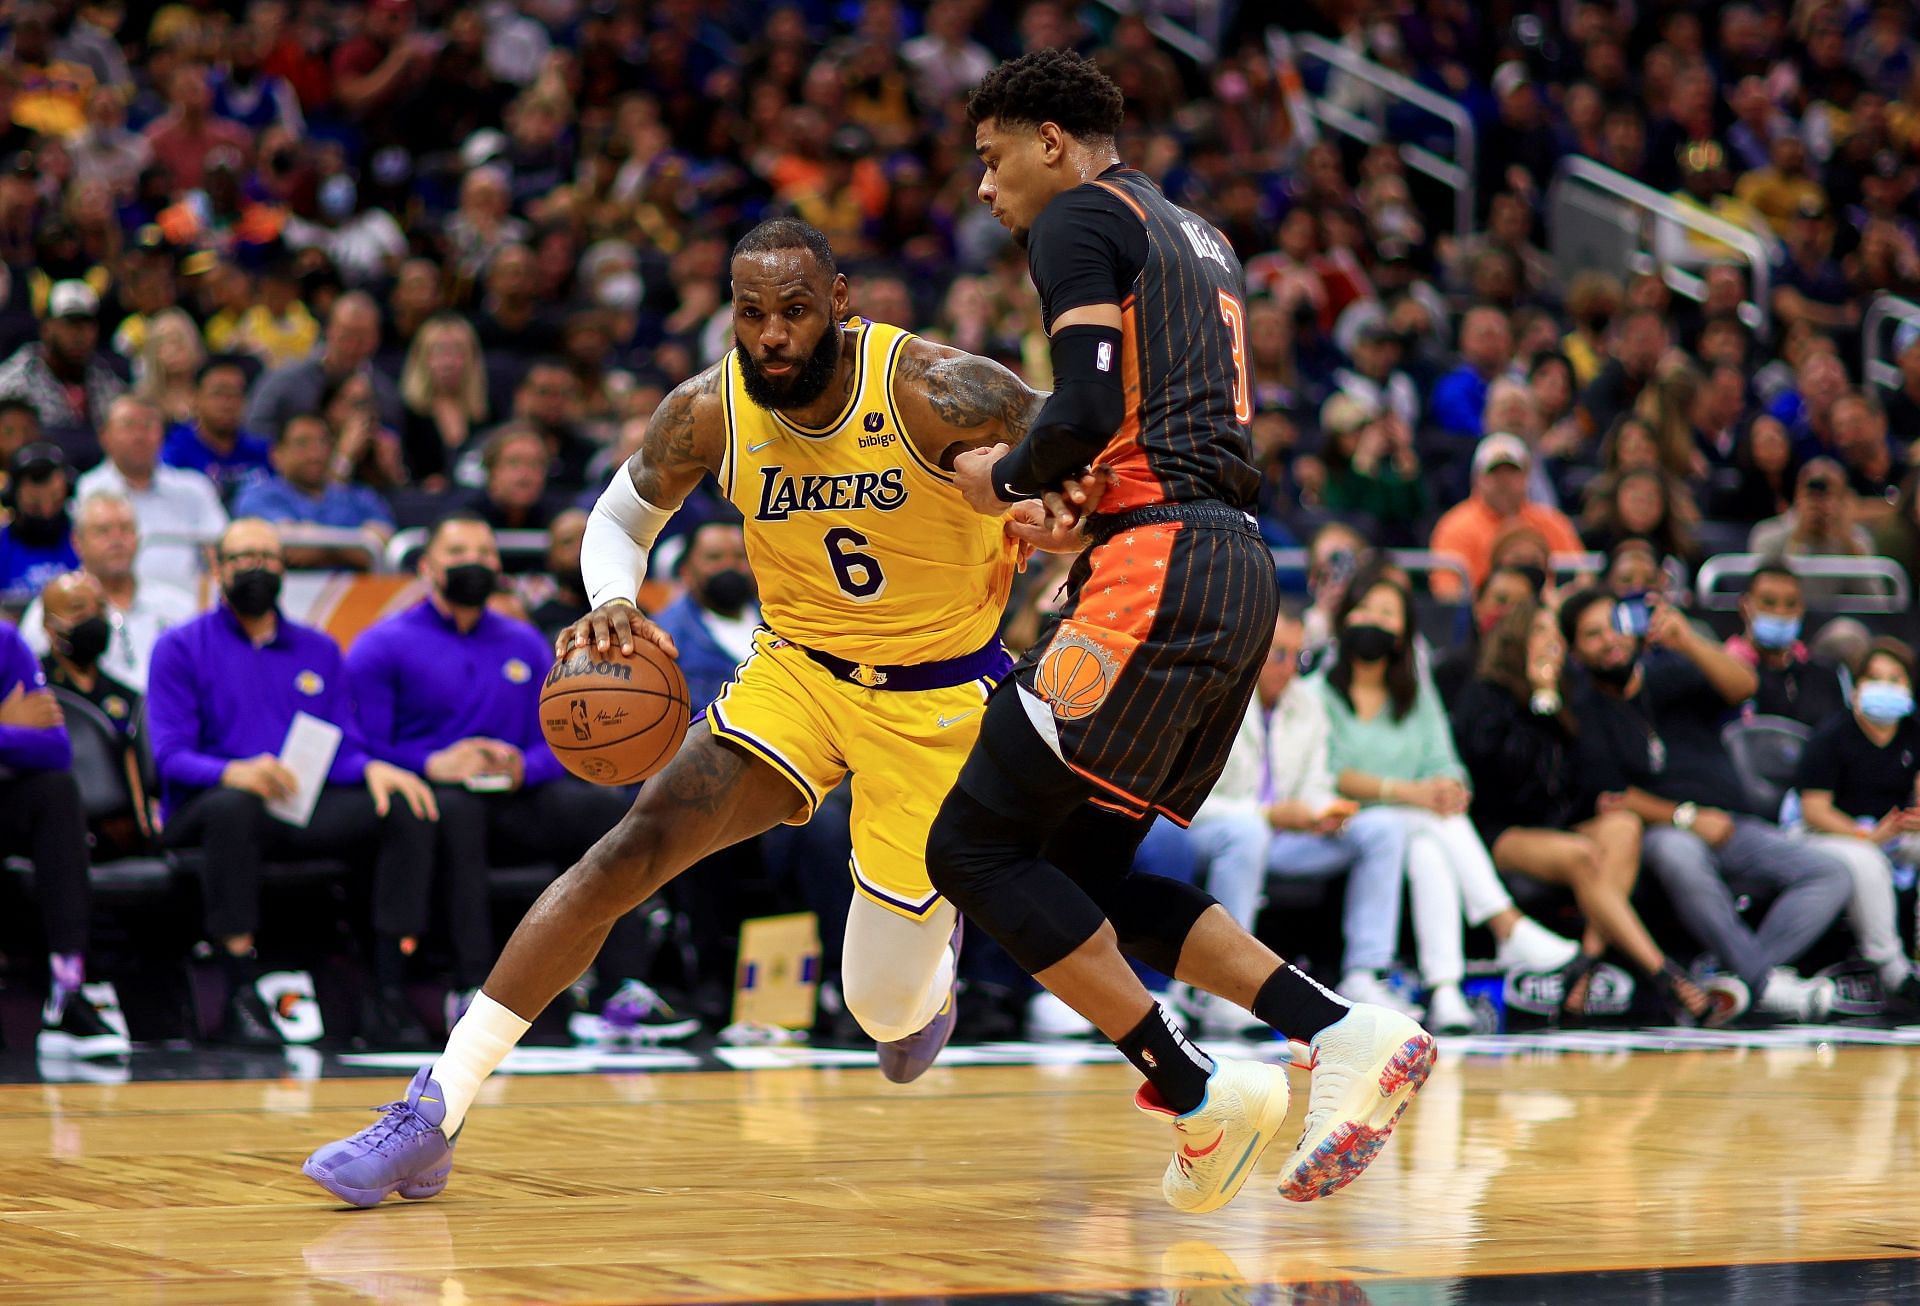 LeBron James #6 of the Los Angeles Lakers drives to the basket during a game against the Orlando Magic at Amway Center on January 21, 2022 in Orlando, Florida.